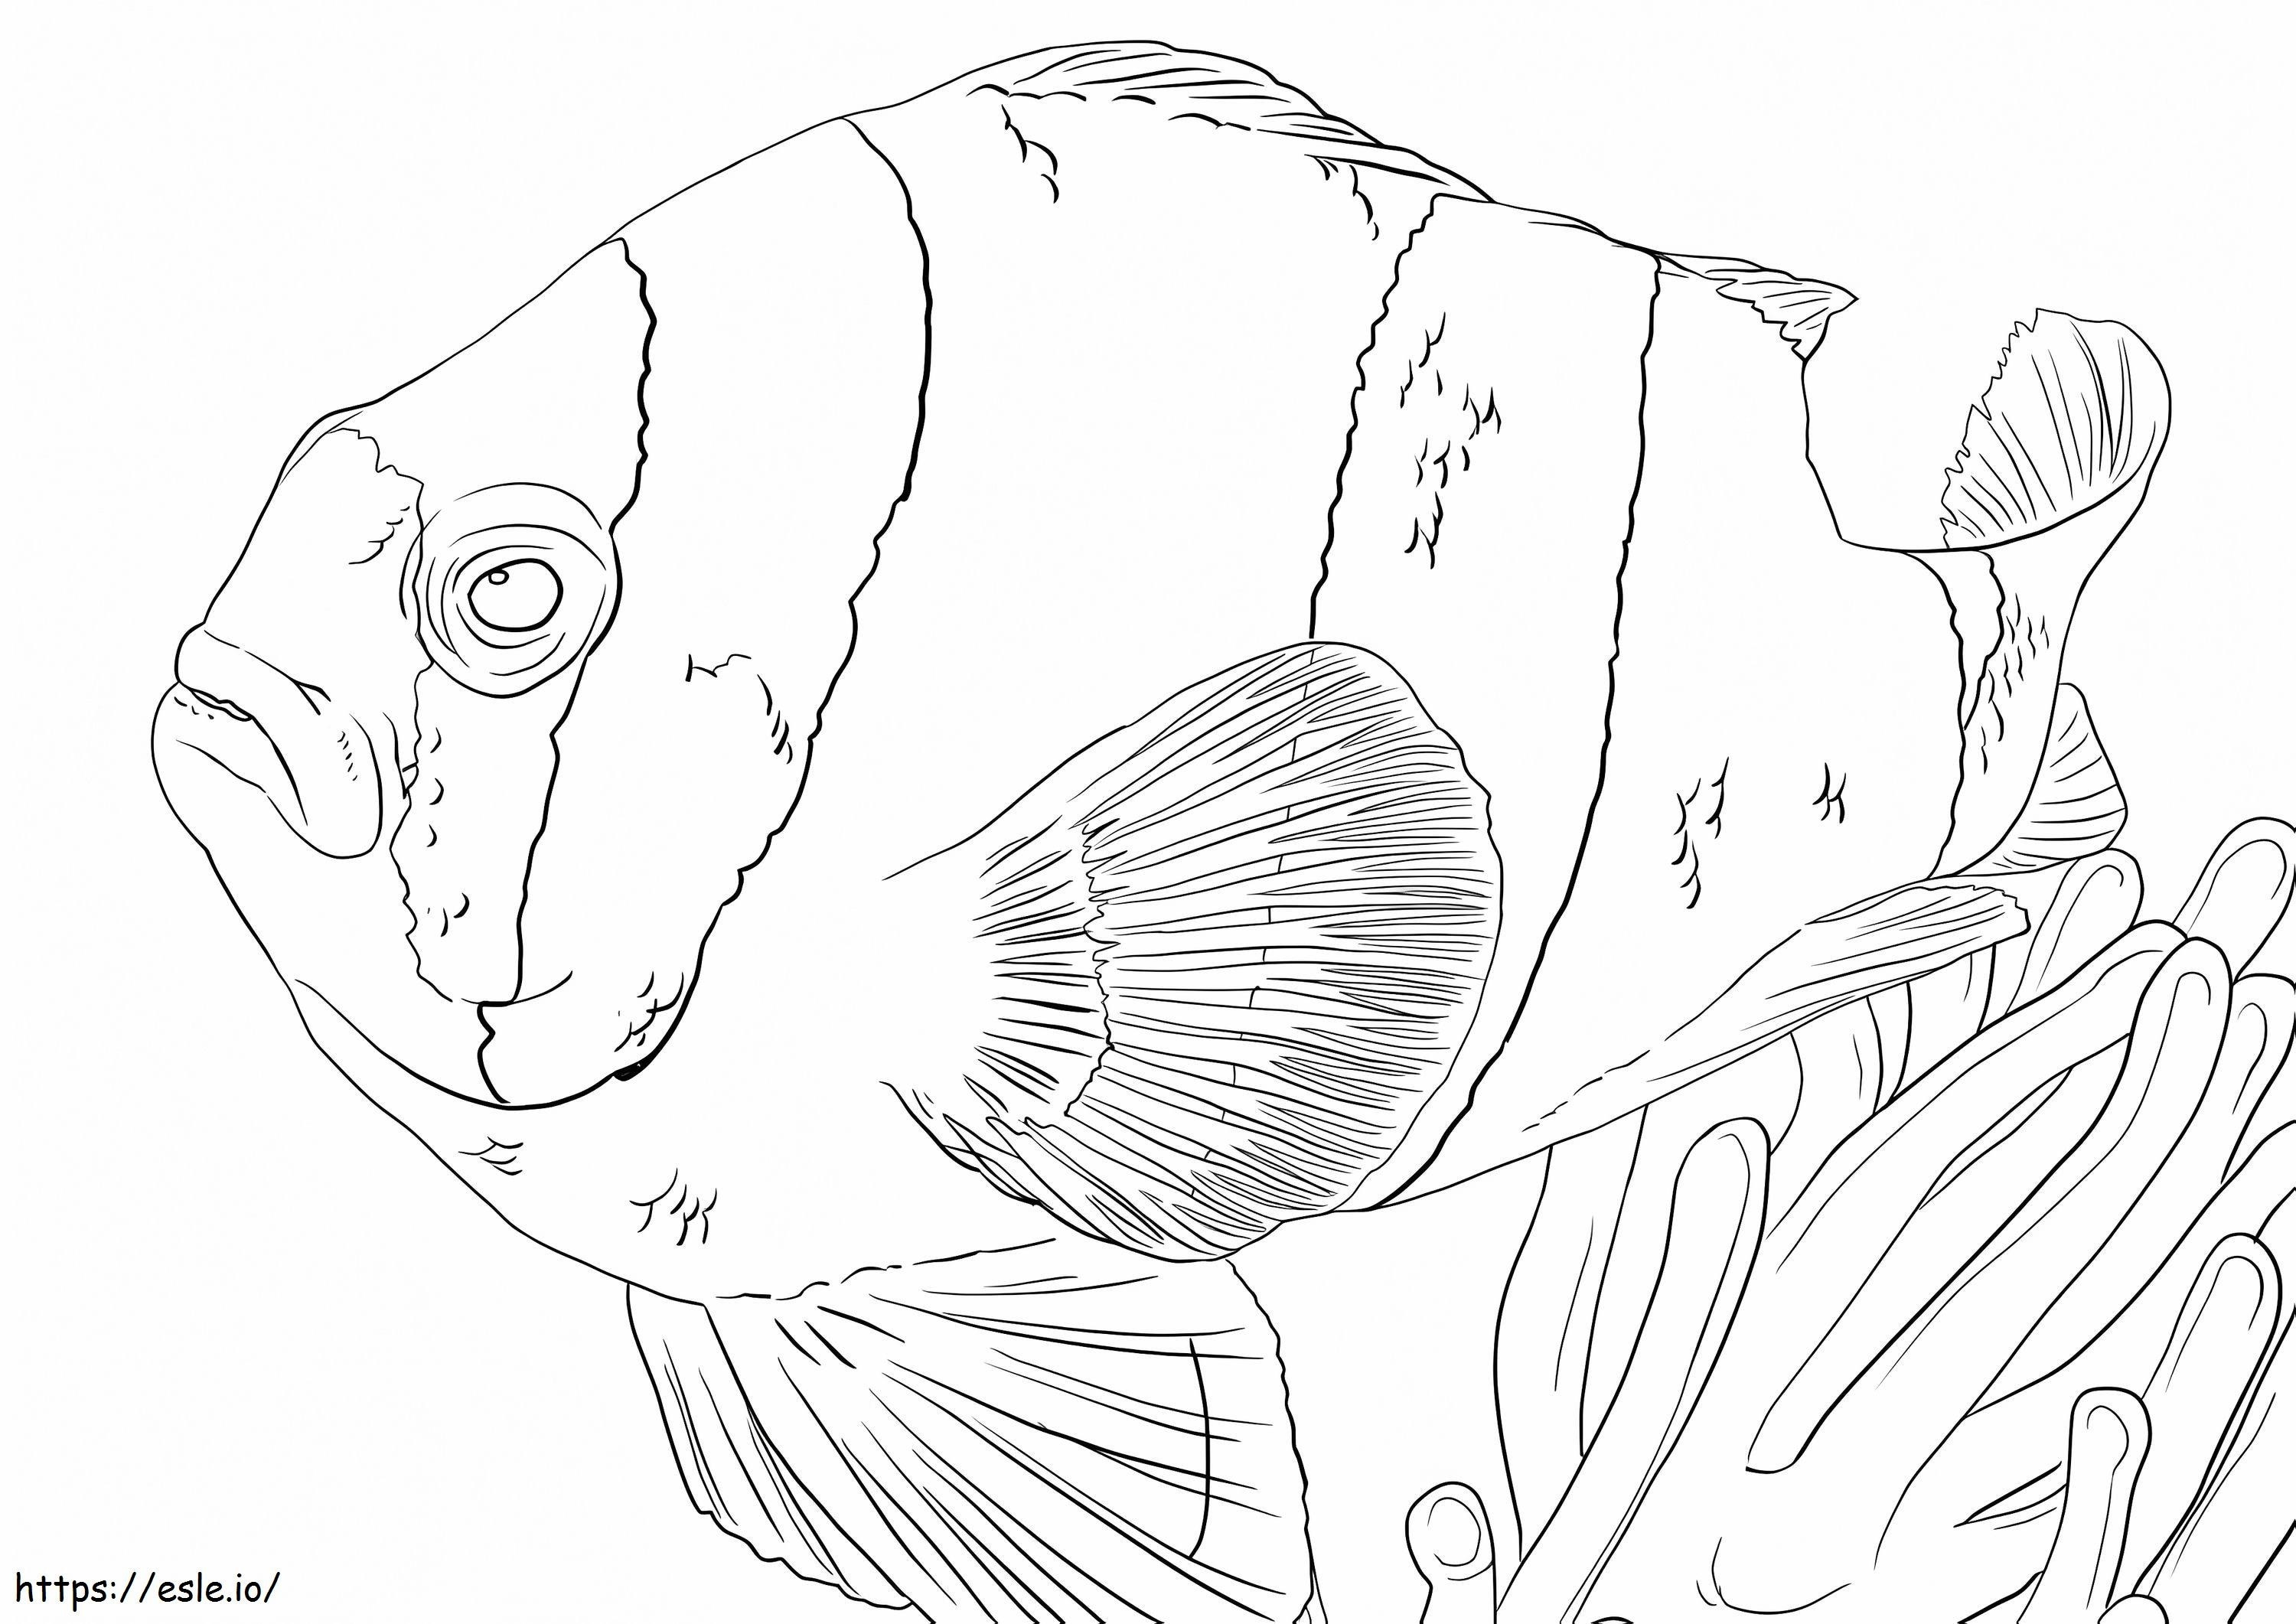 Clarks Anemonefish coloring page